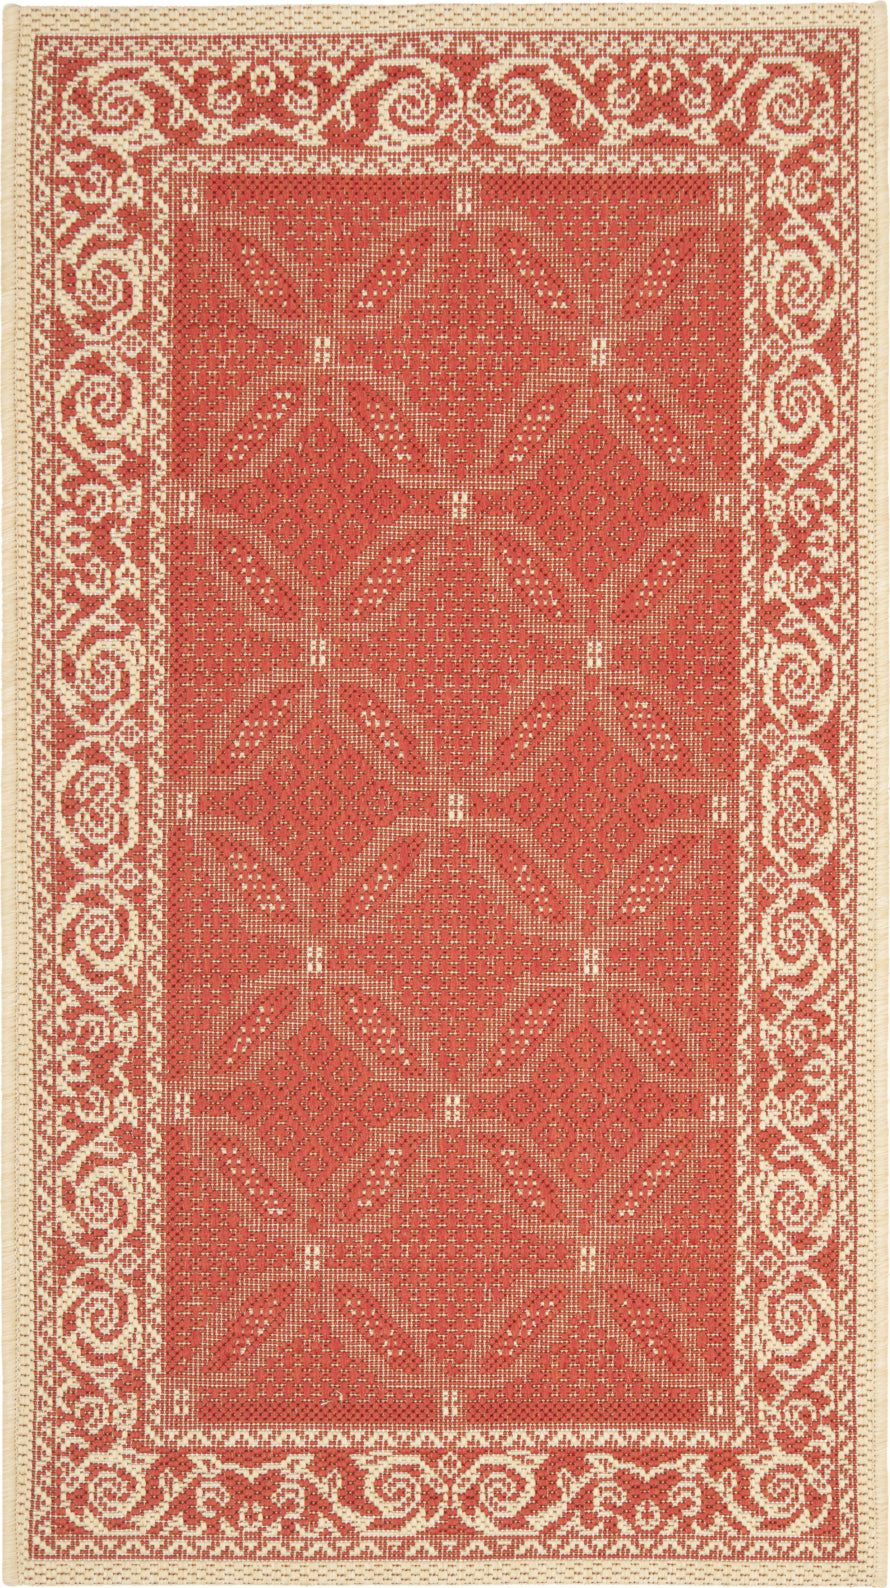 Safavieh Courtyard CY1502 Red/Natural Area Rug main image